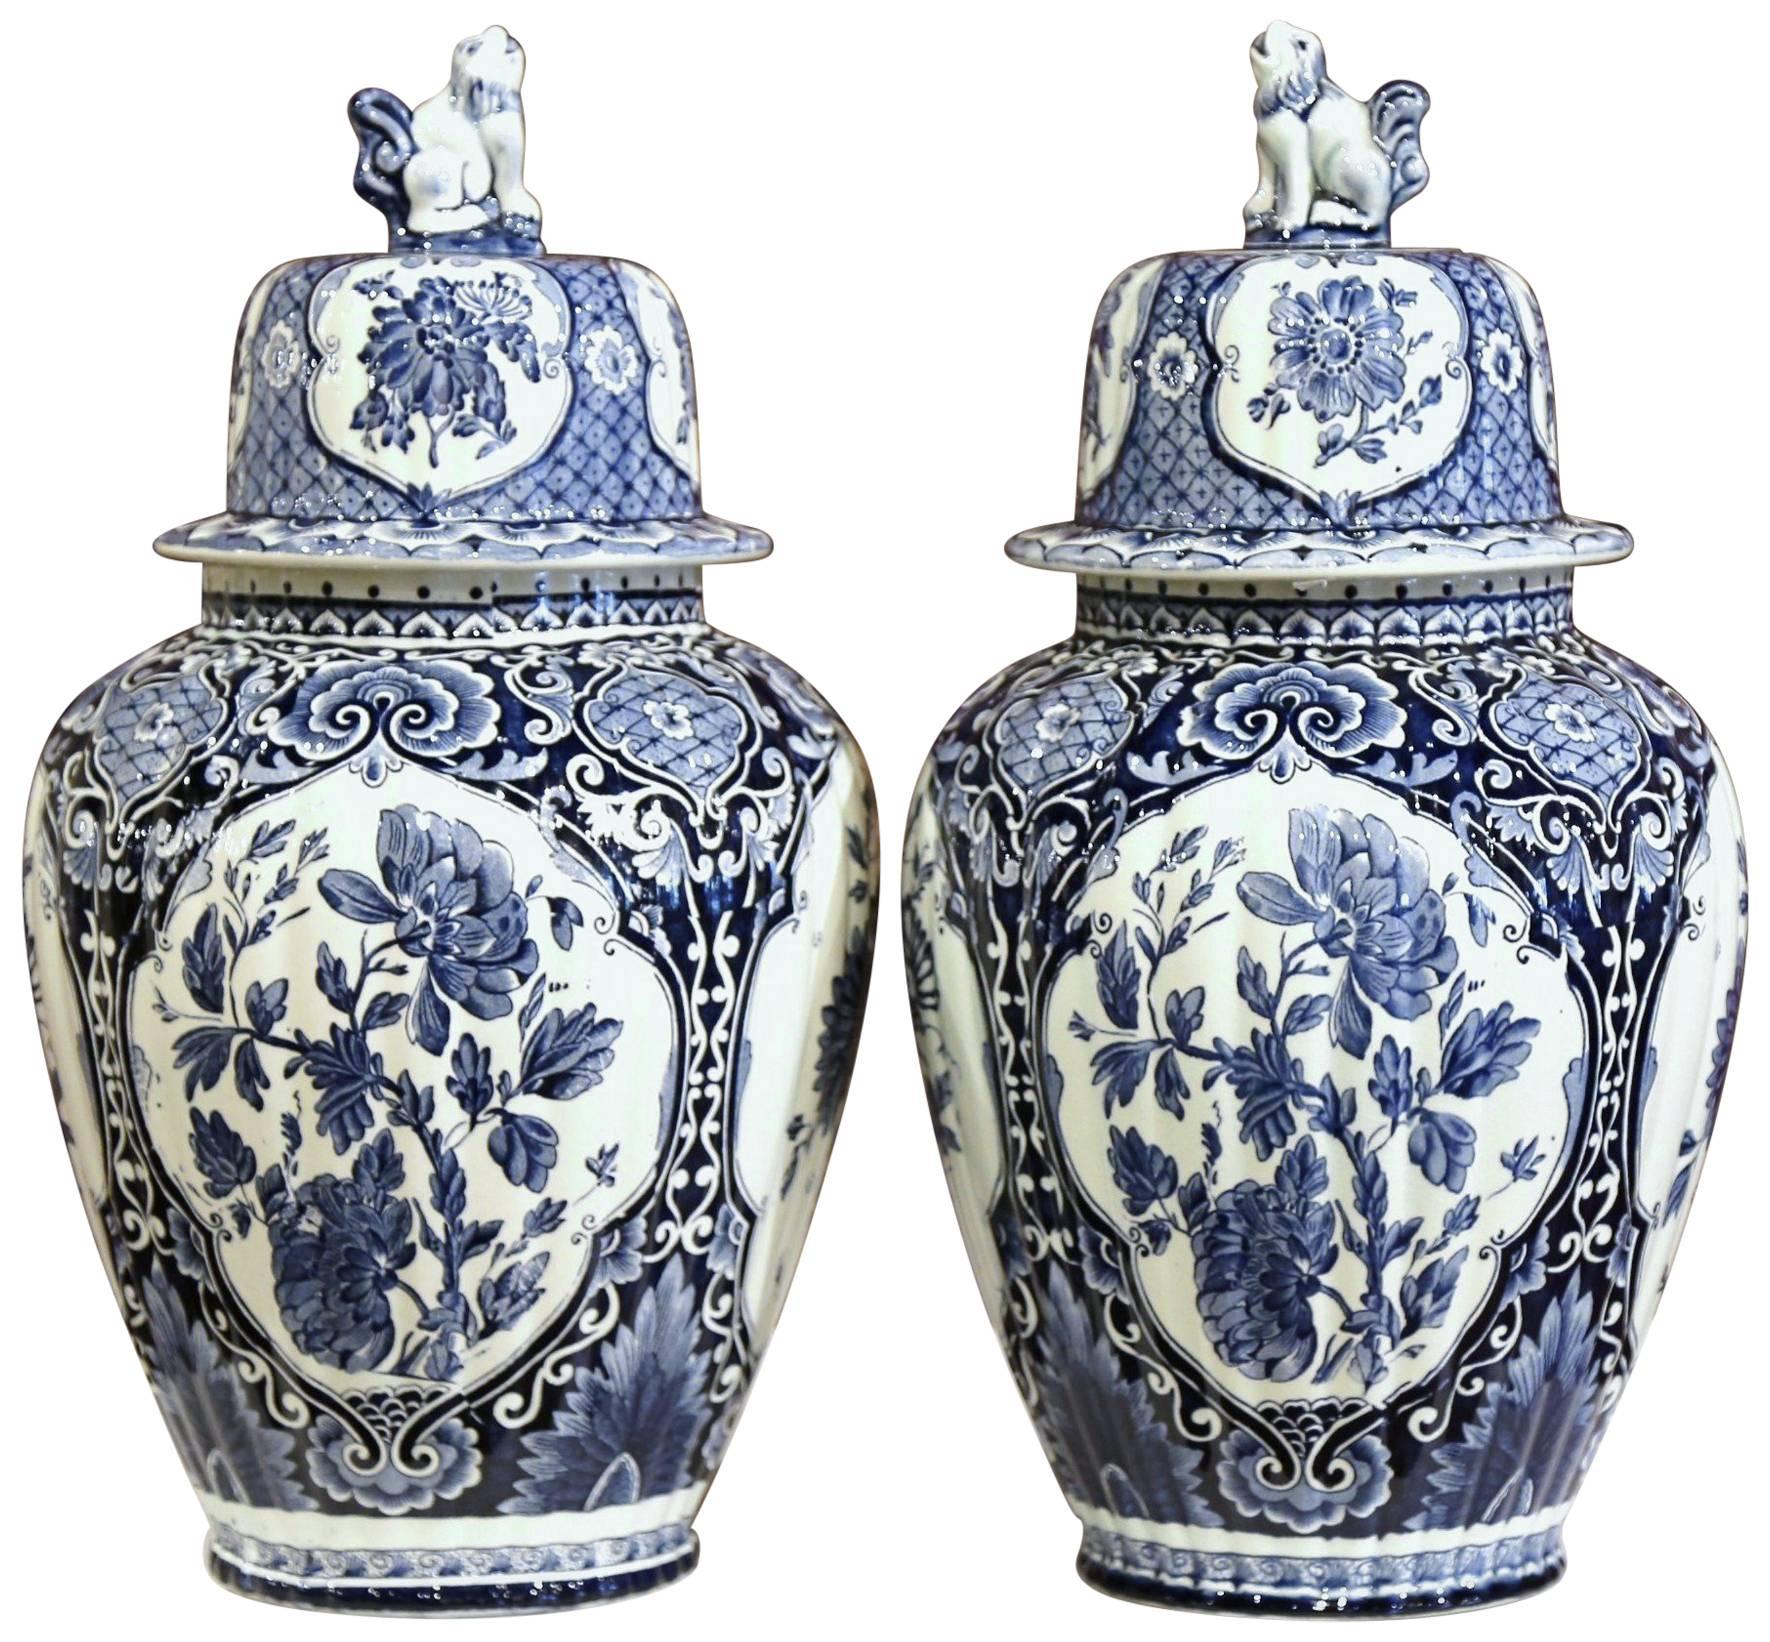 Pair of Mid-20th Century Dutch Blue and White Maastricht Delft Ginger Jars